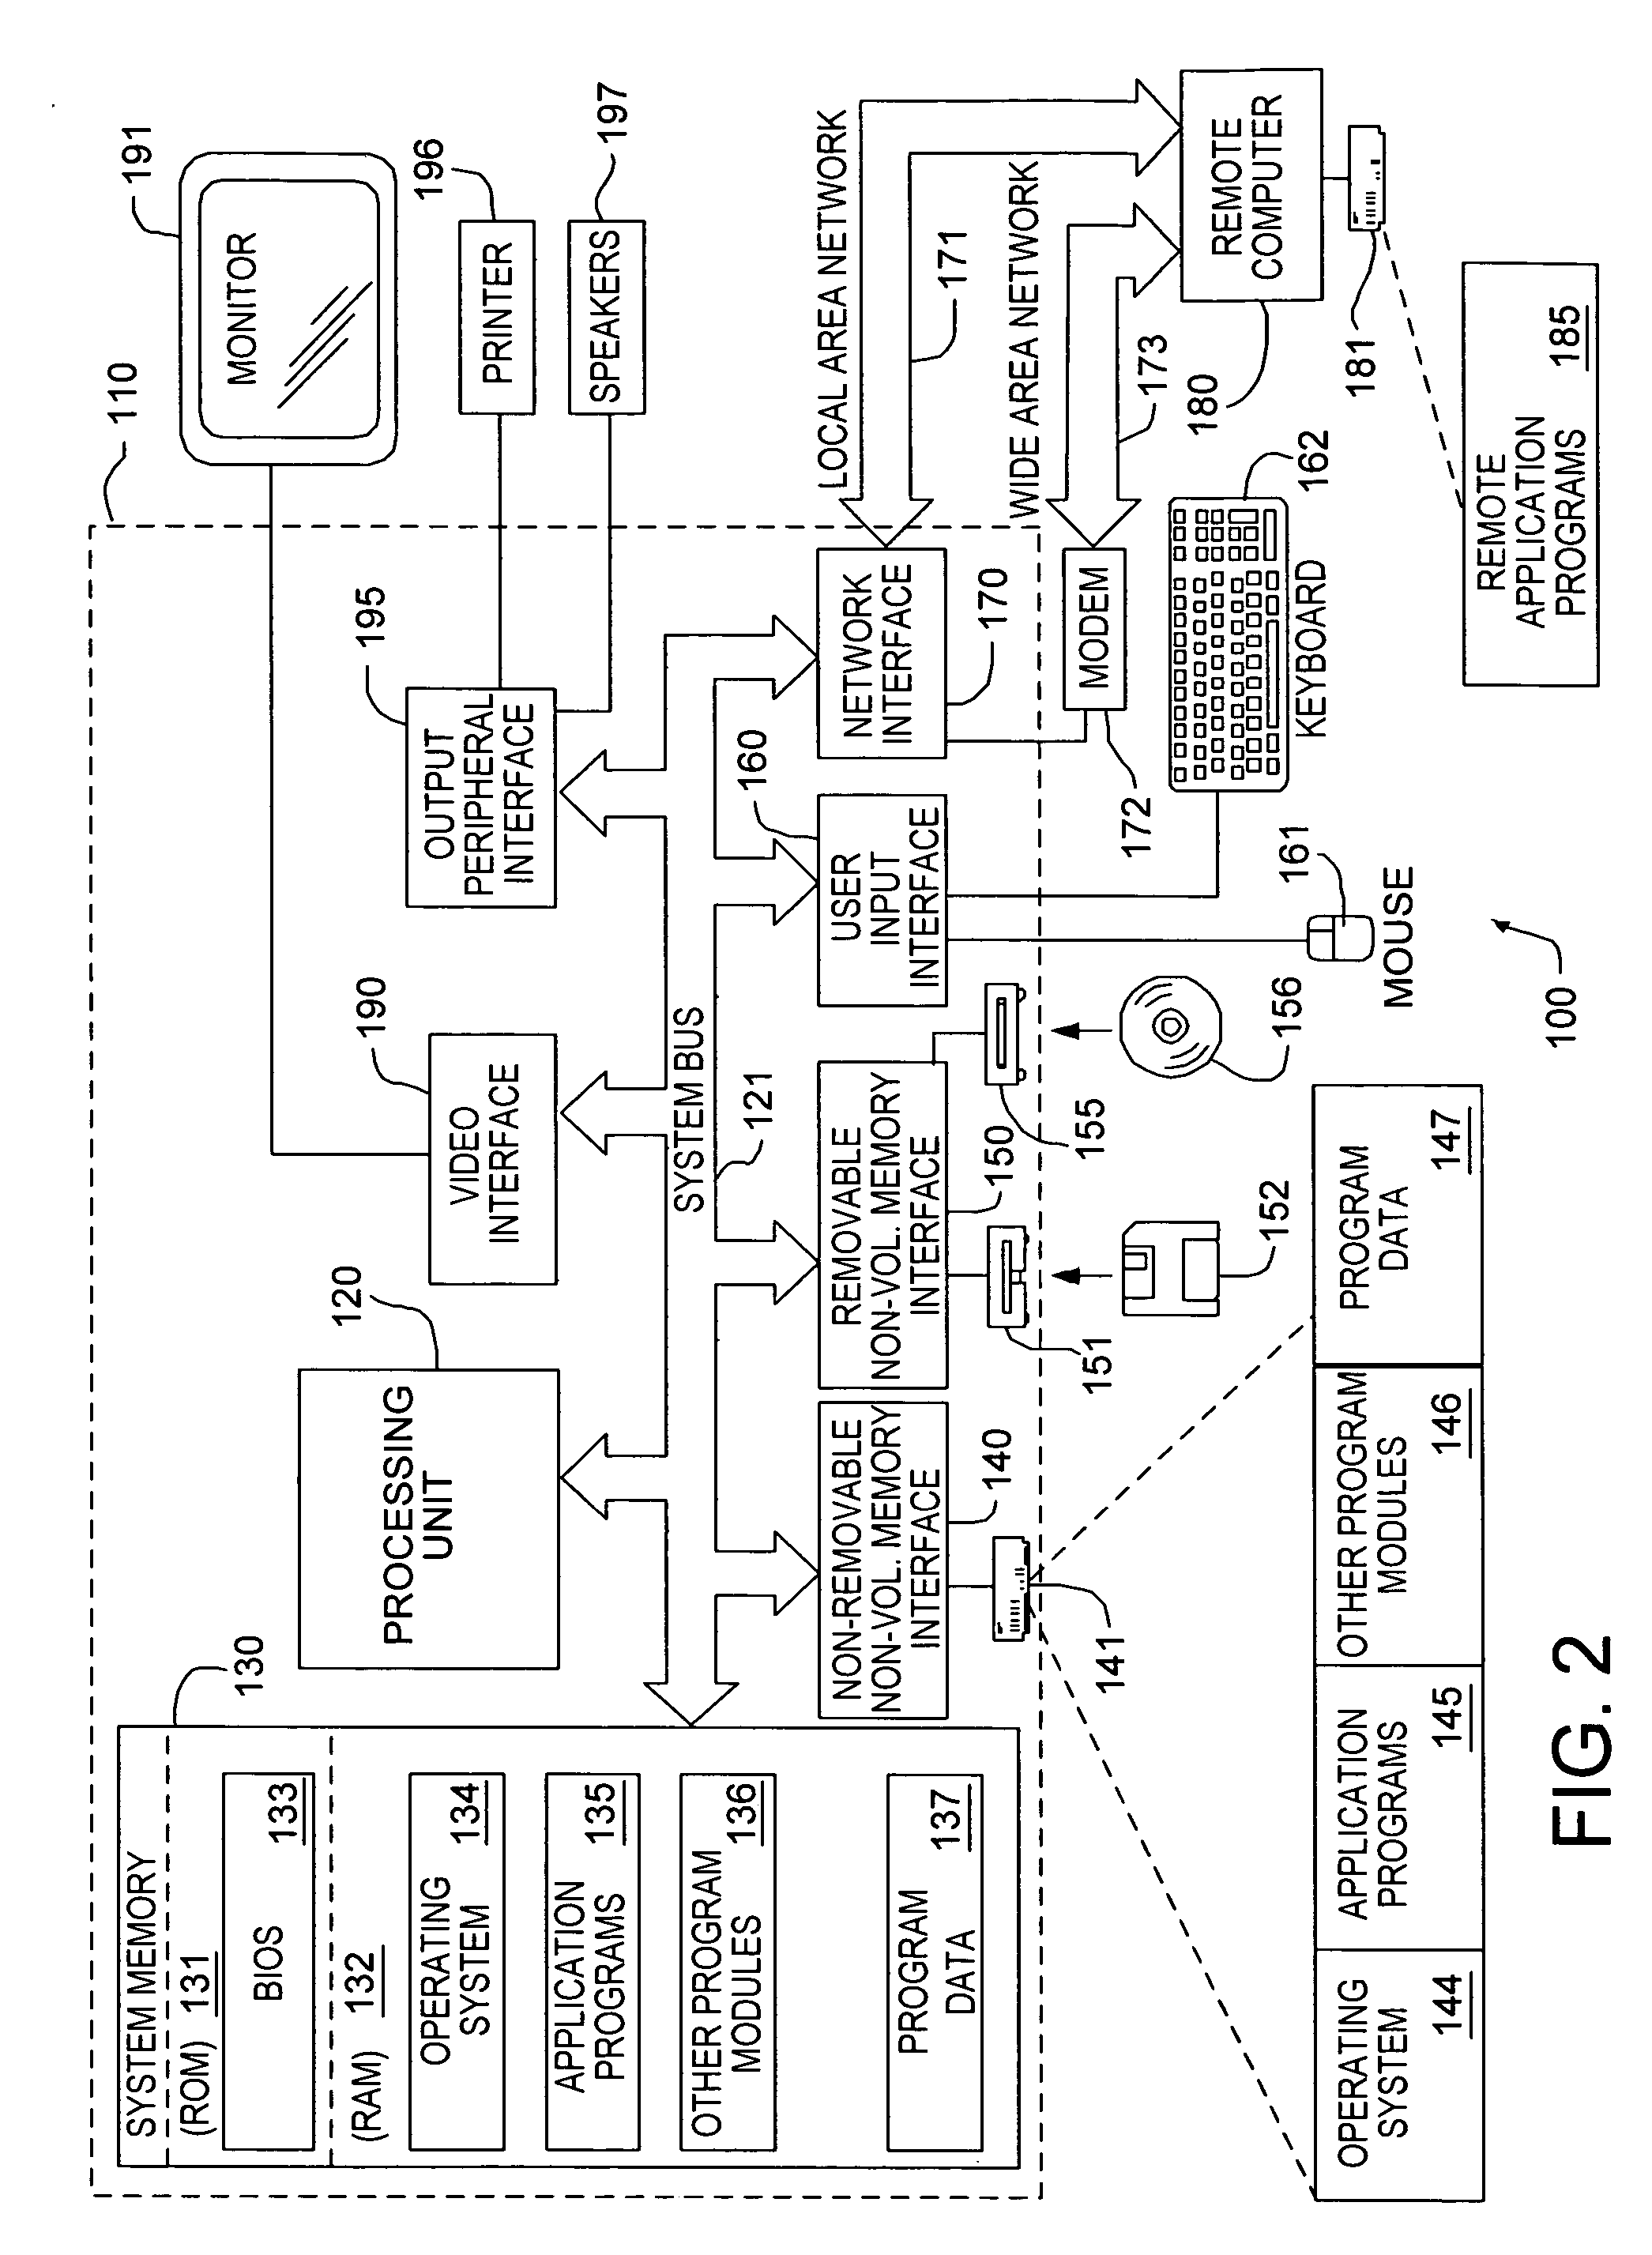 System and method for integrating instant messaging in a multimedia environment